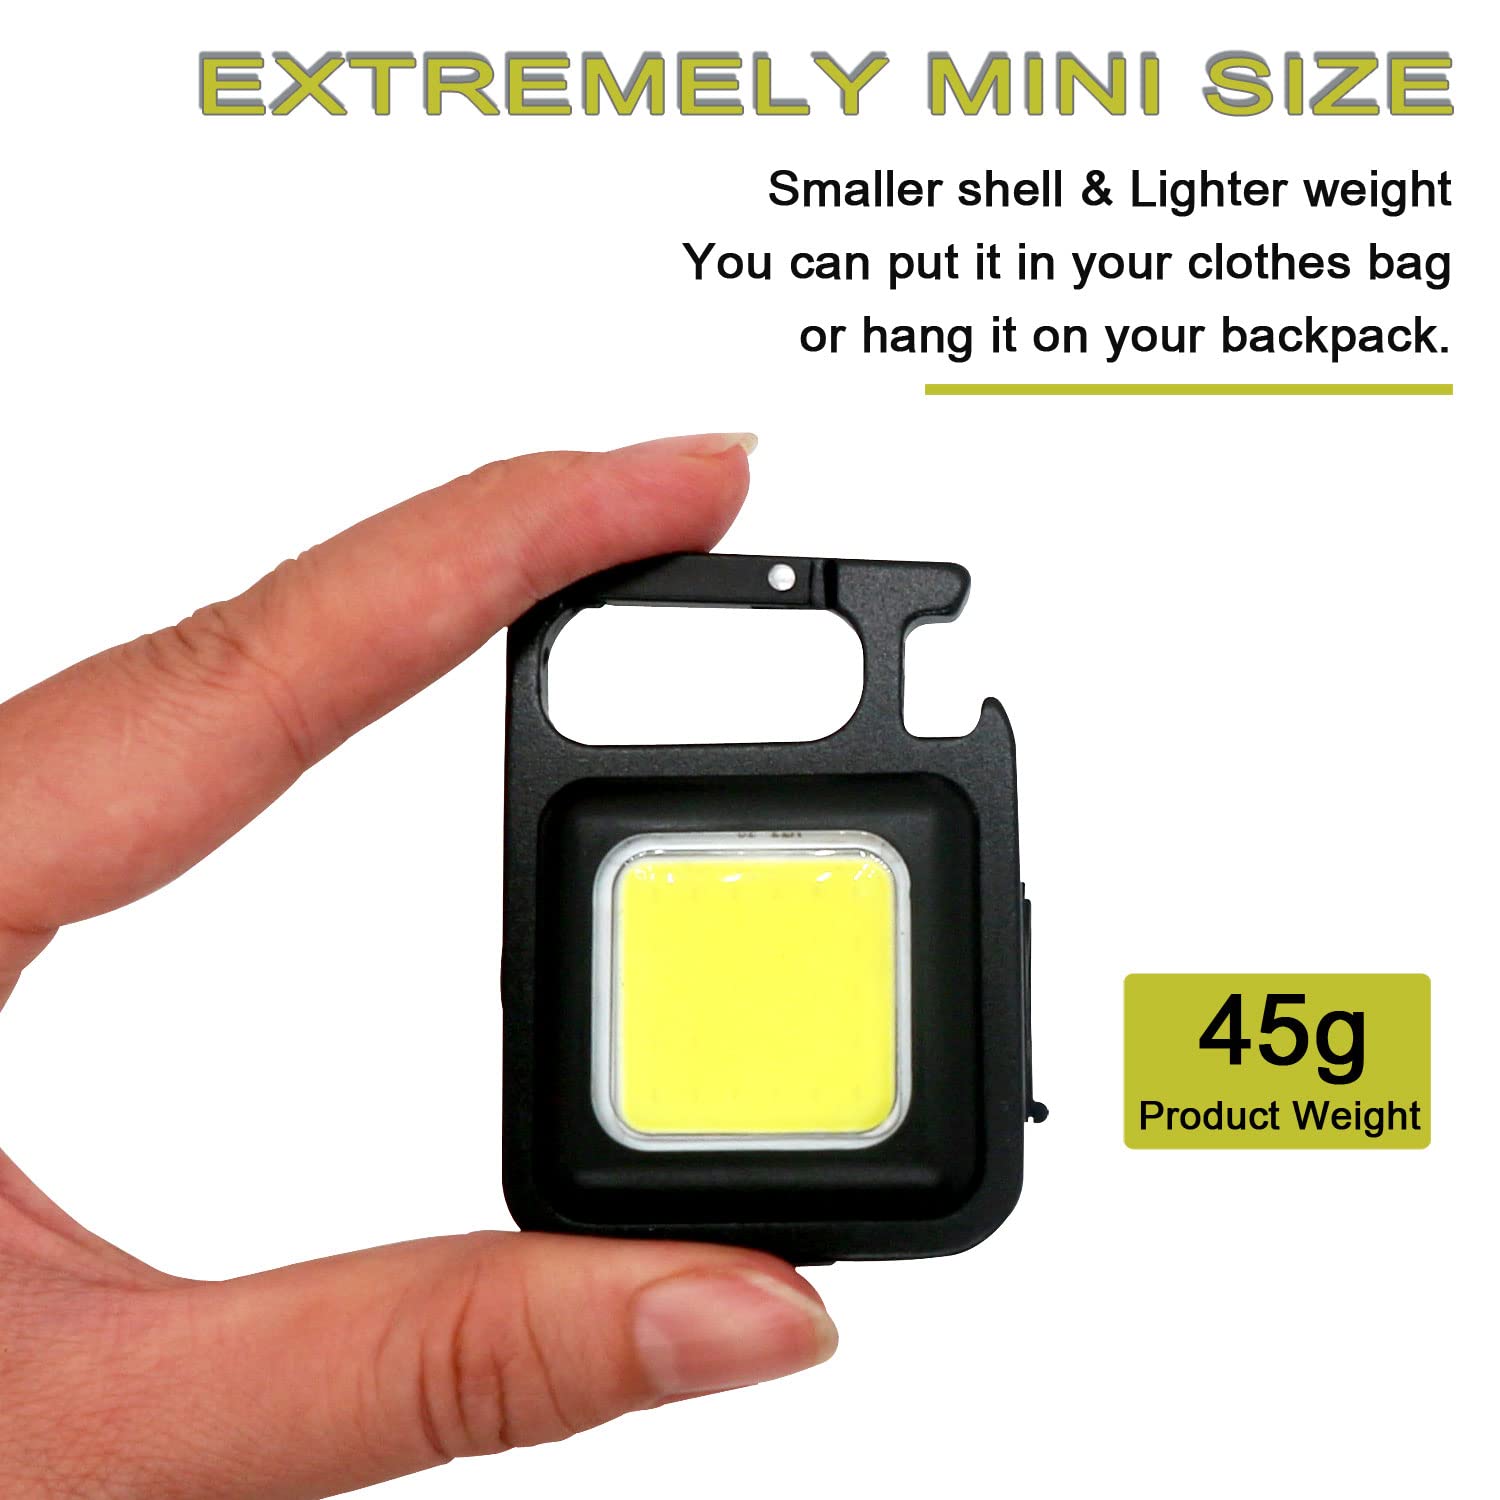 Keychain Light,Mini Cob Flashlight,Super Bright Light (Max to 500Lumens)Rechargeable Small Emergency Light,4 Modes Portable Pocket Light with Folding Bracket Bottle Opener for Fishing ,Camping,Walking